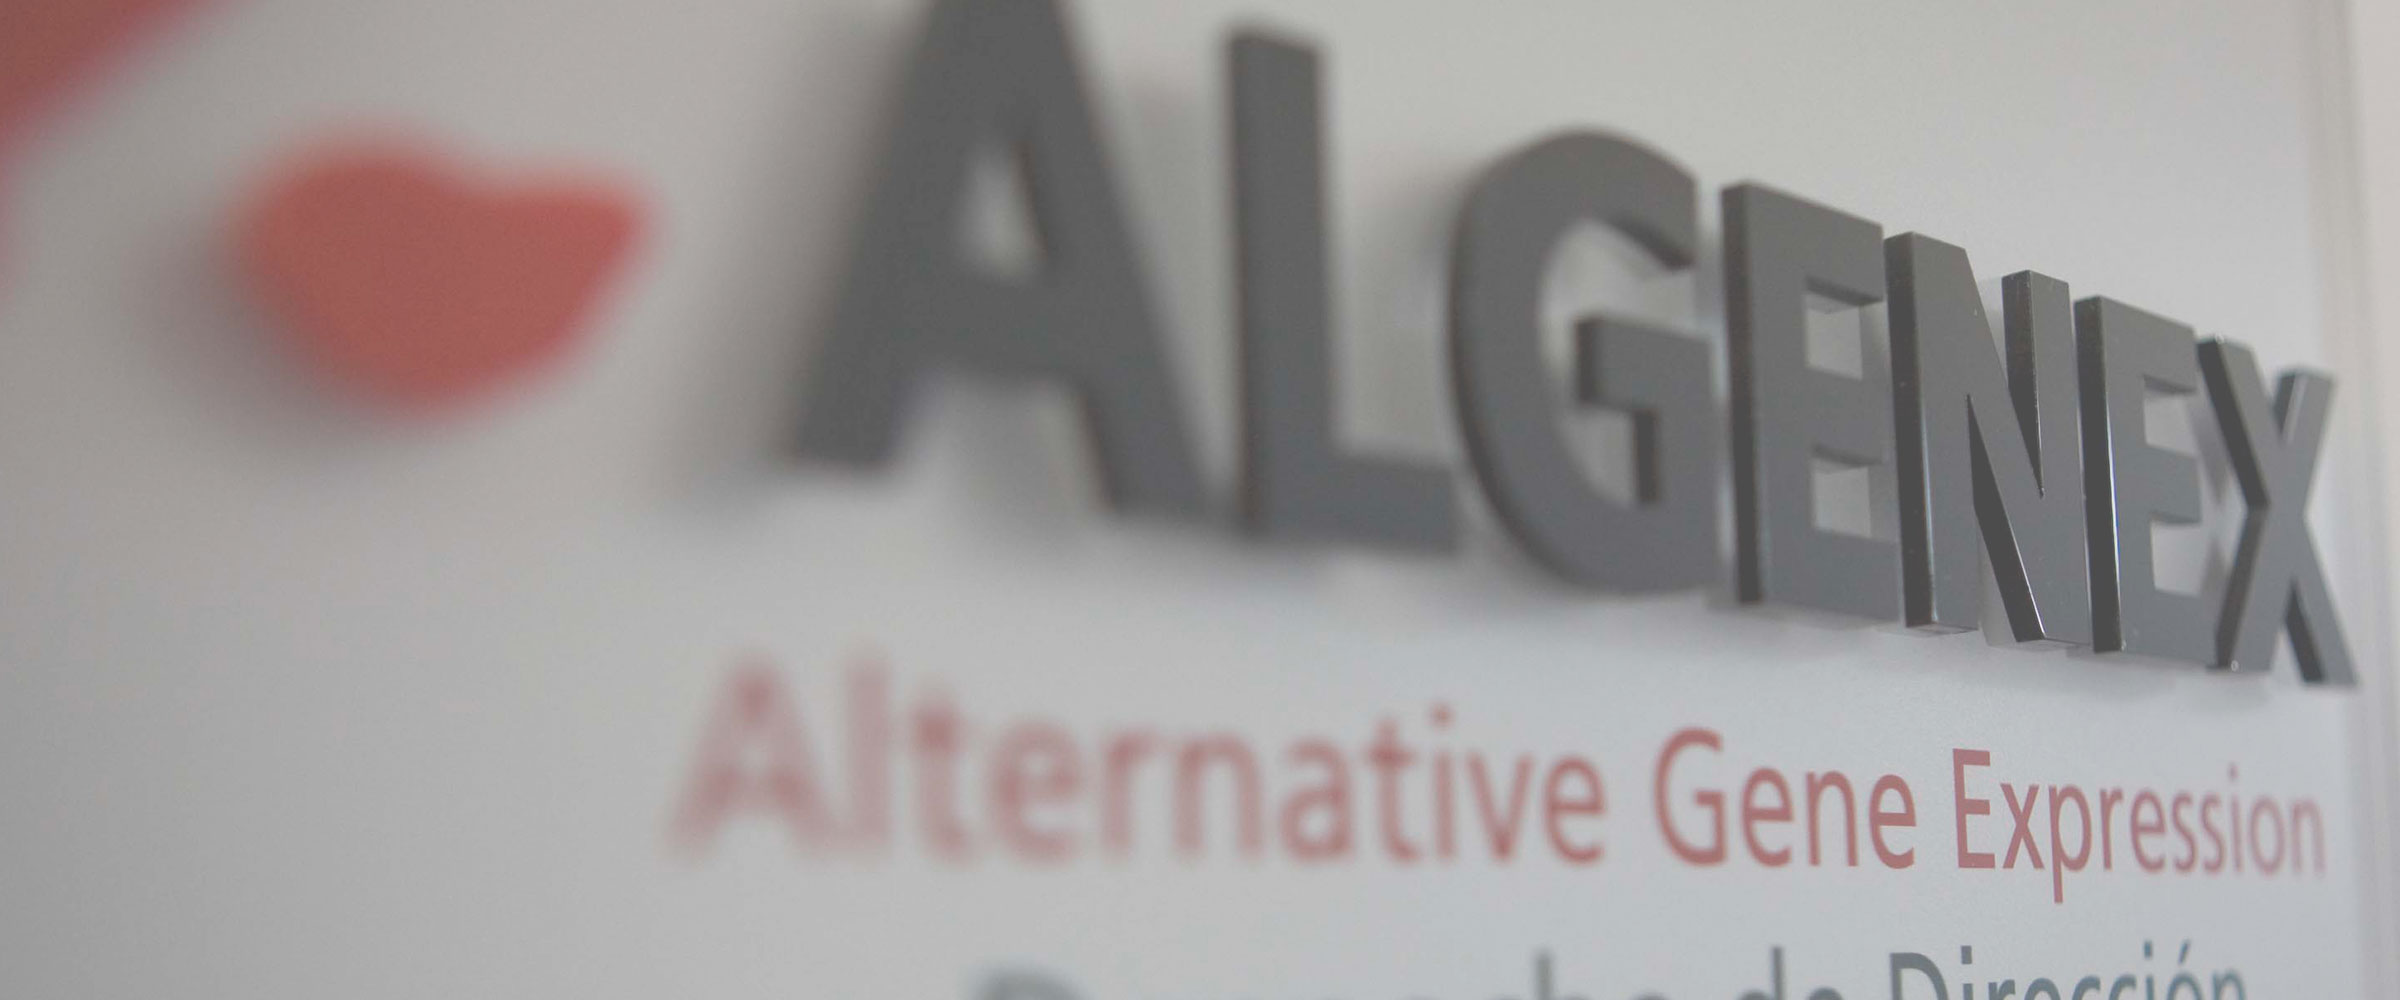 Algenex and FATRO sign commercial license agreement for development of a second CrisBio®-based vaccine